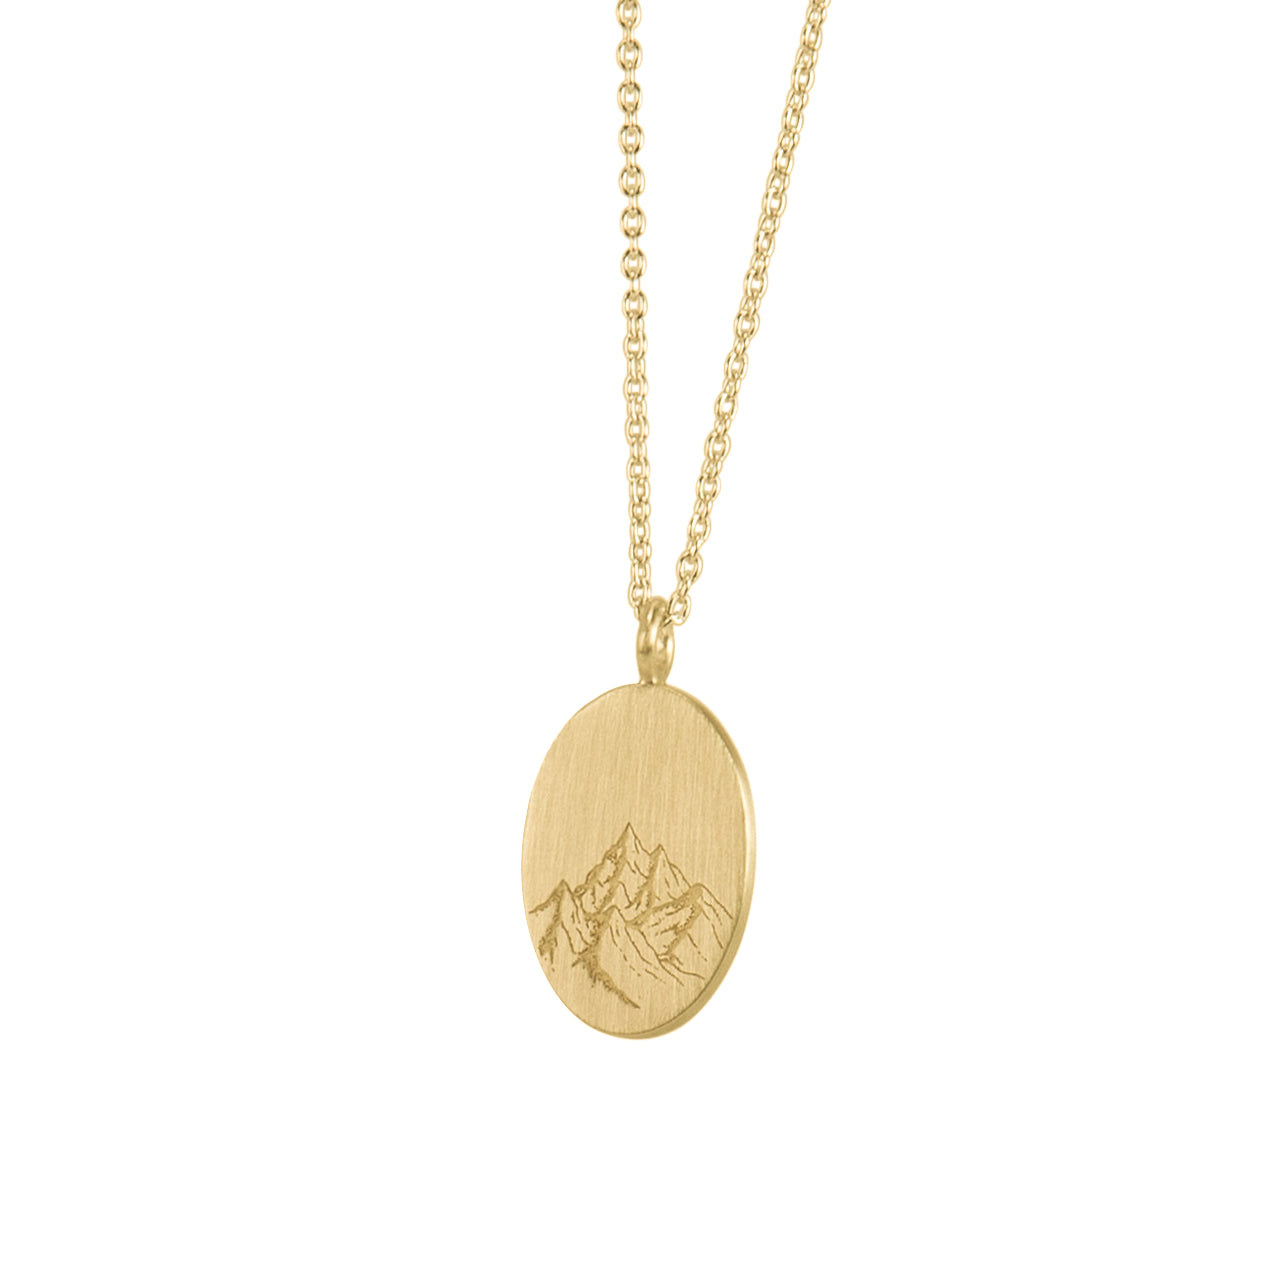 Sustainable gold necklace. This ethical Wanderlust Pendant is handmade in Cape Town in recycled gold from e-waste.